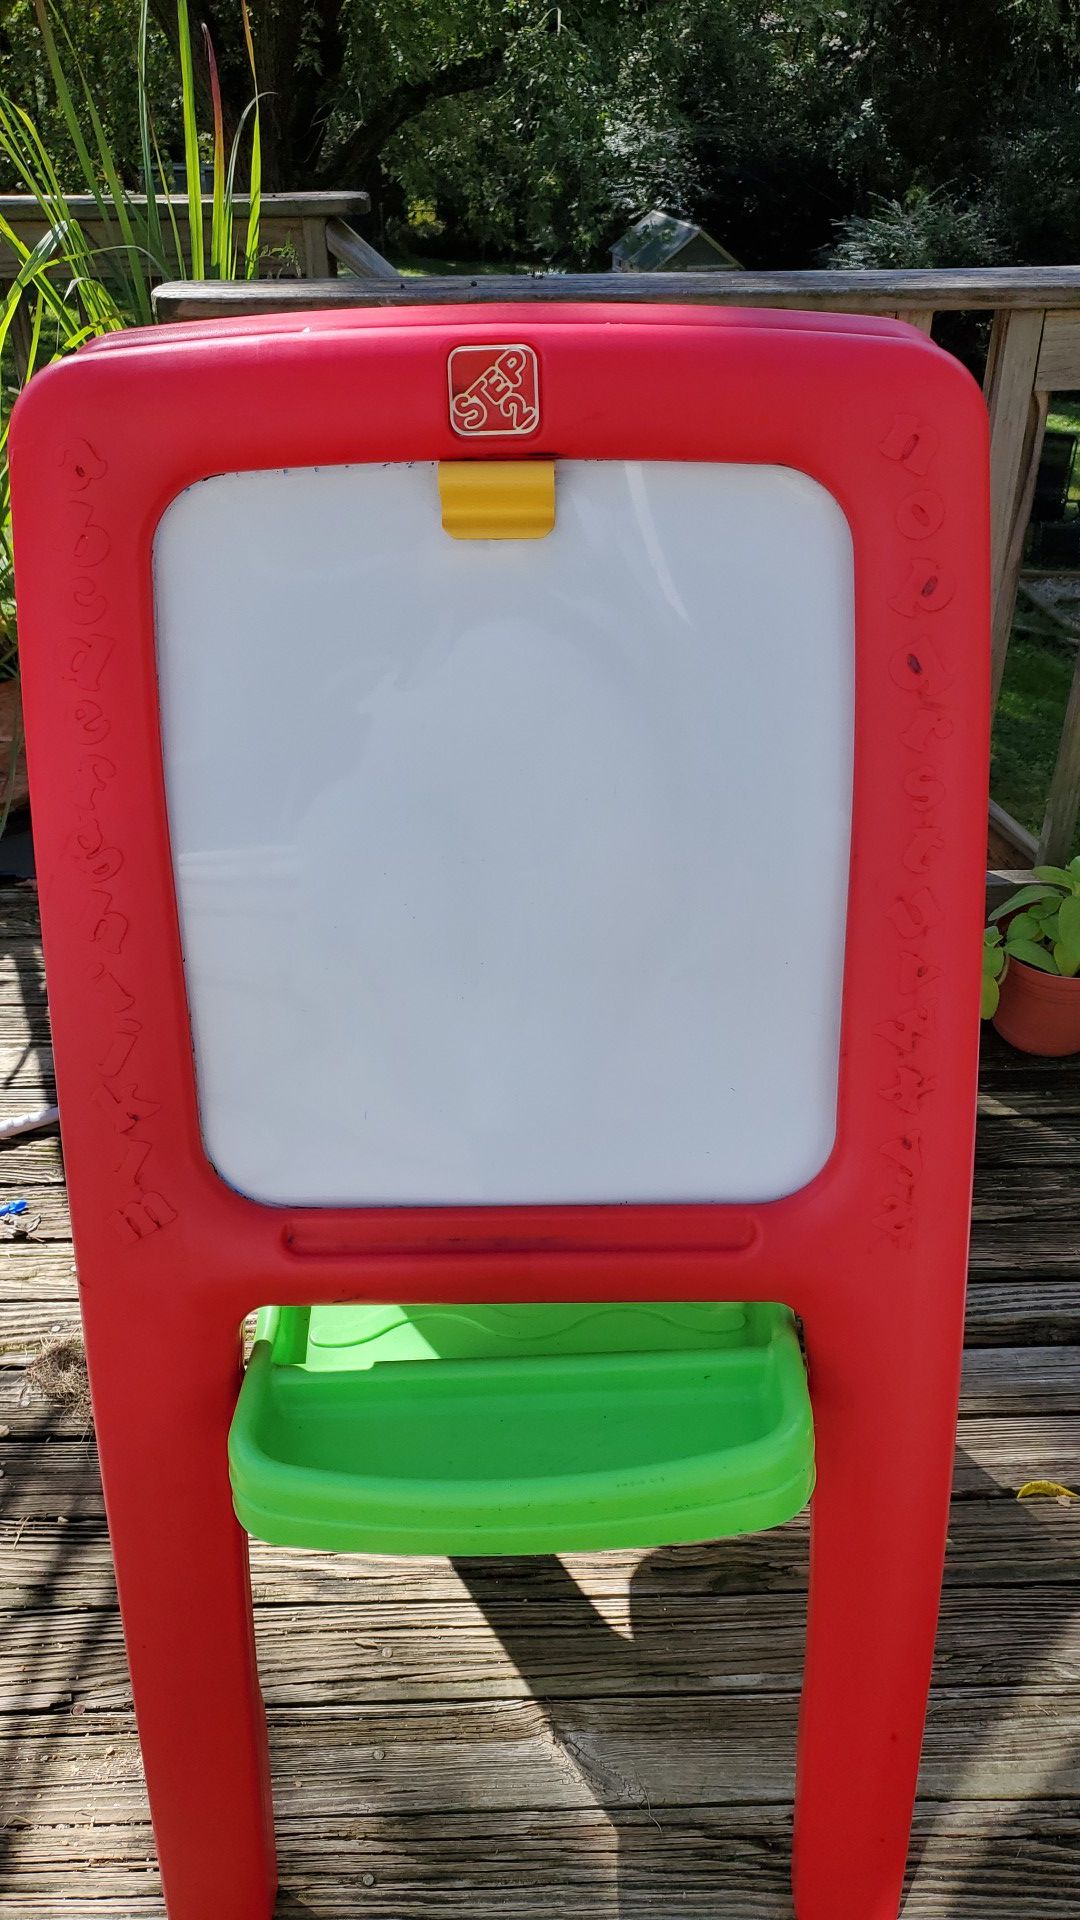 Step 2 kids art easel for two , dry erase board on one side and green chalkboard on the other side.